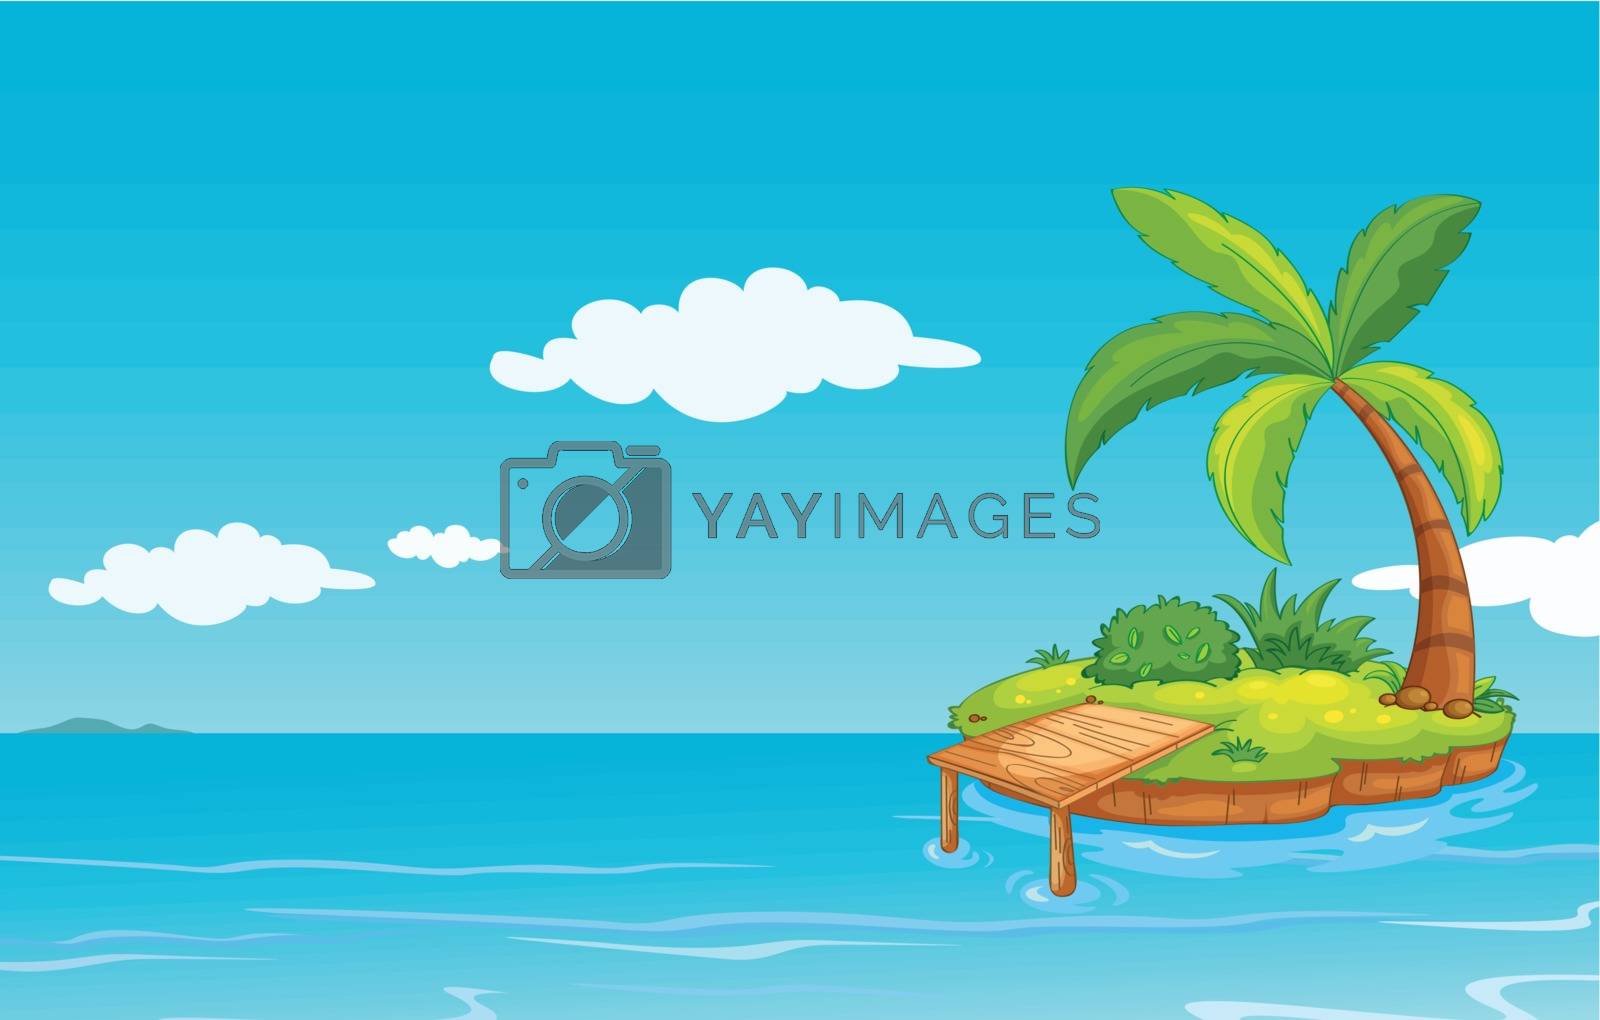 Royalty free image of landscape by iimages